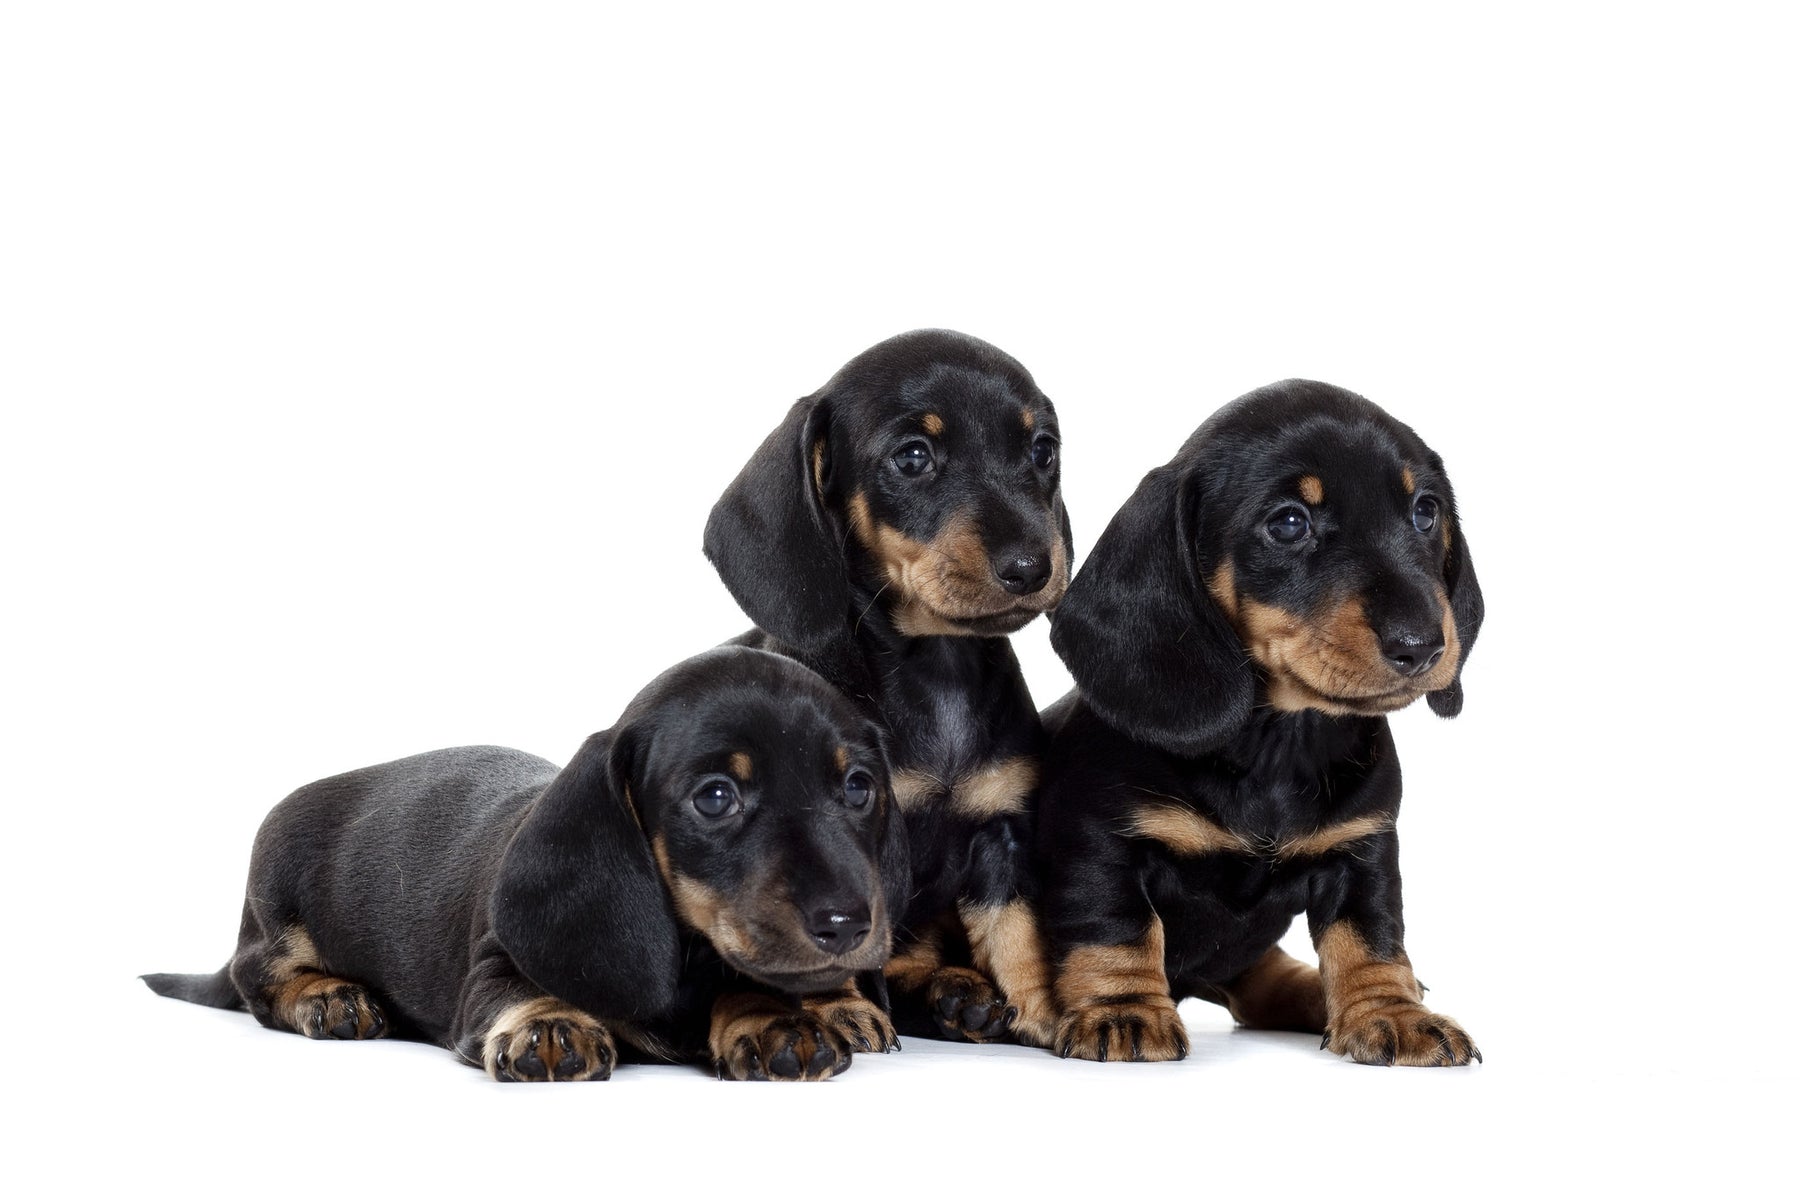 Should you get two puppies at the same time?